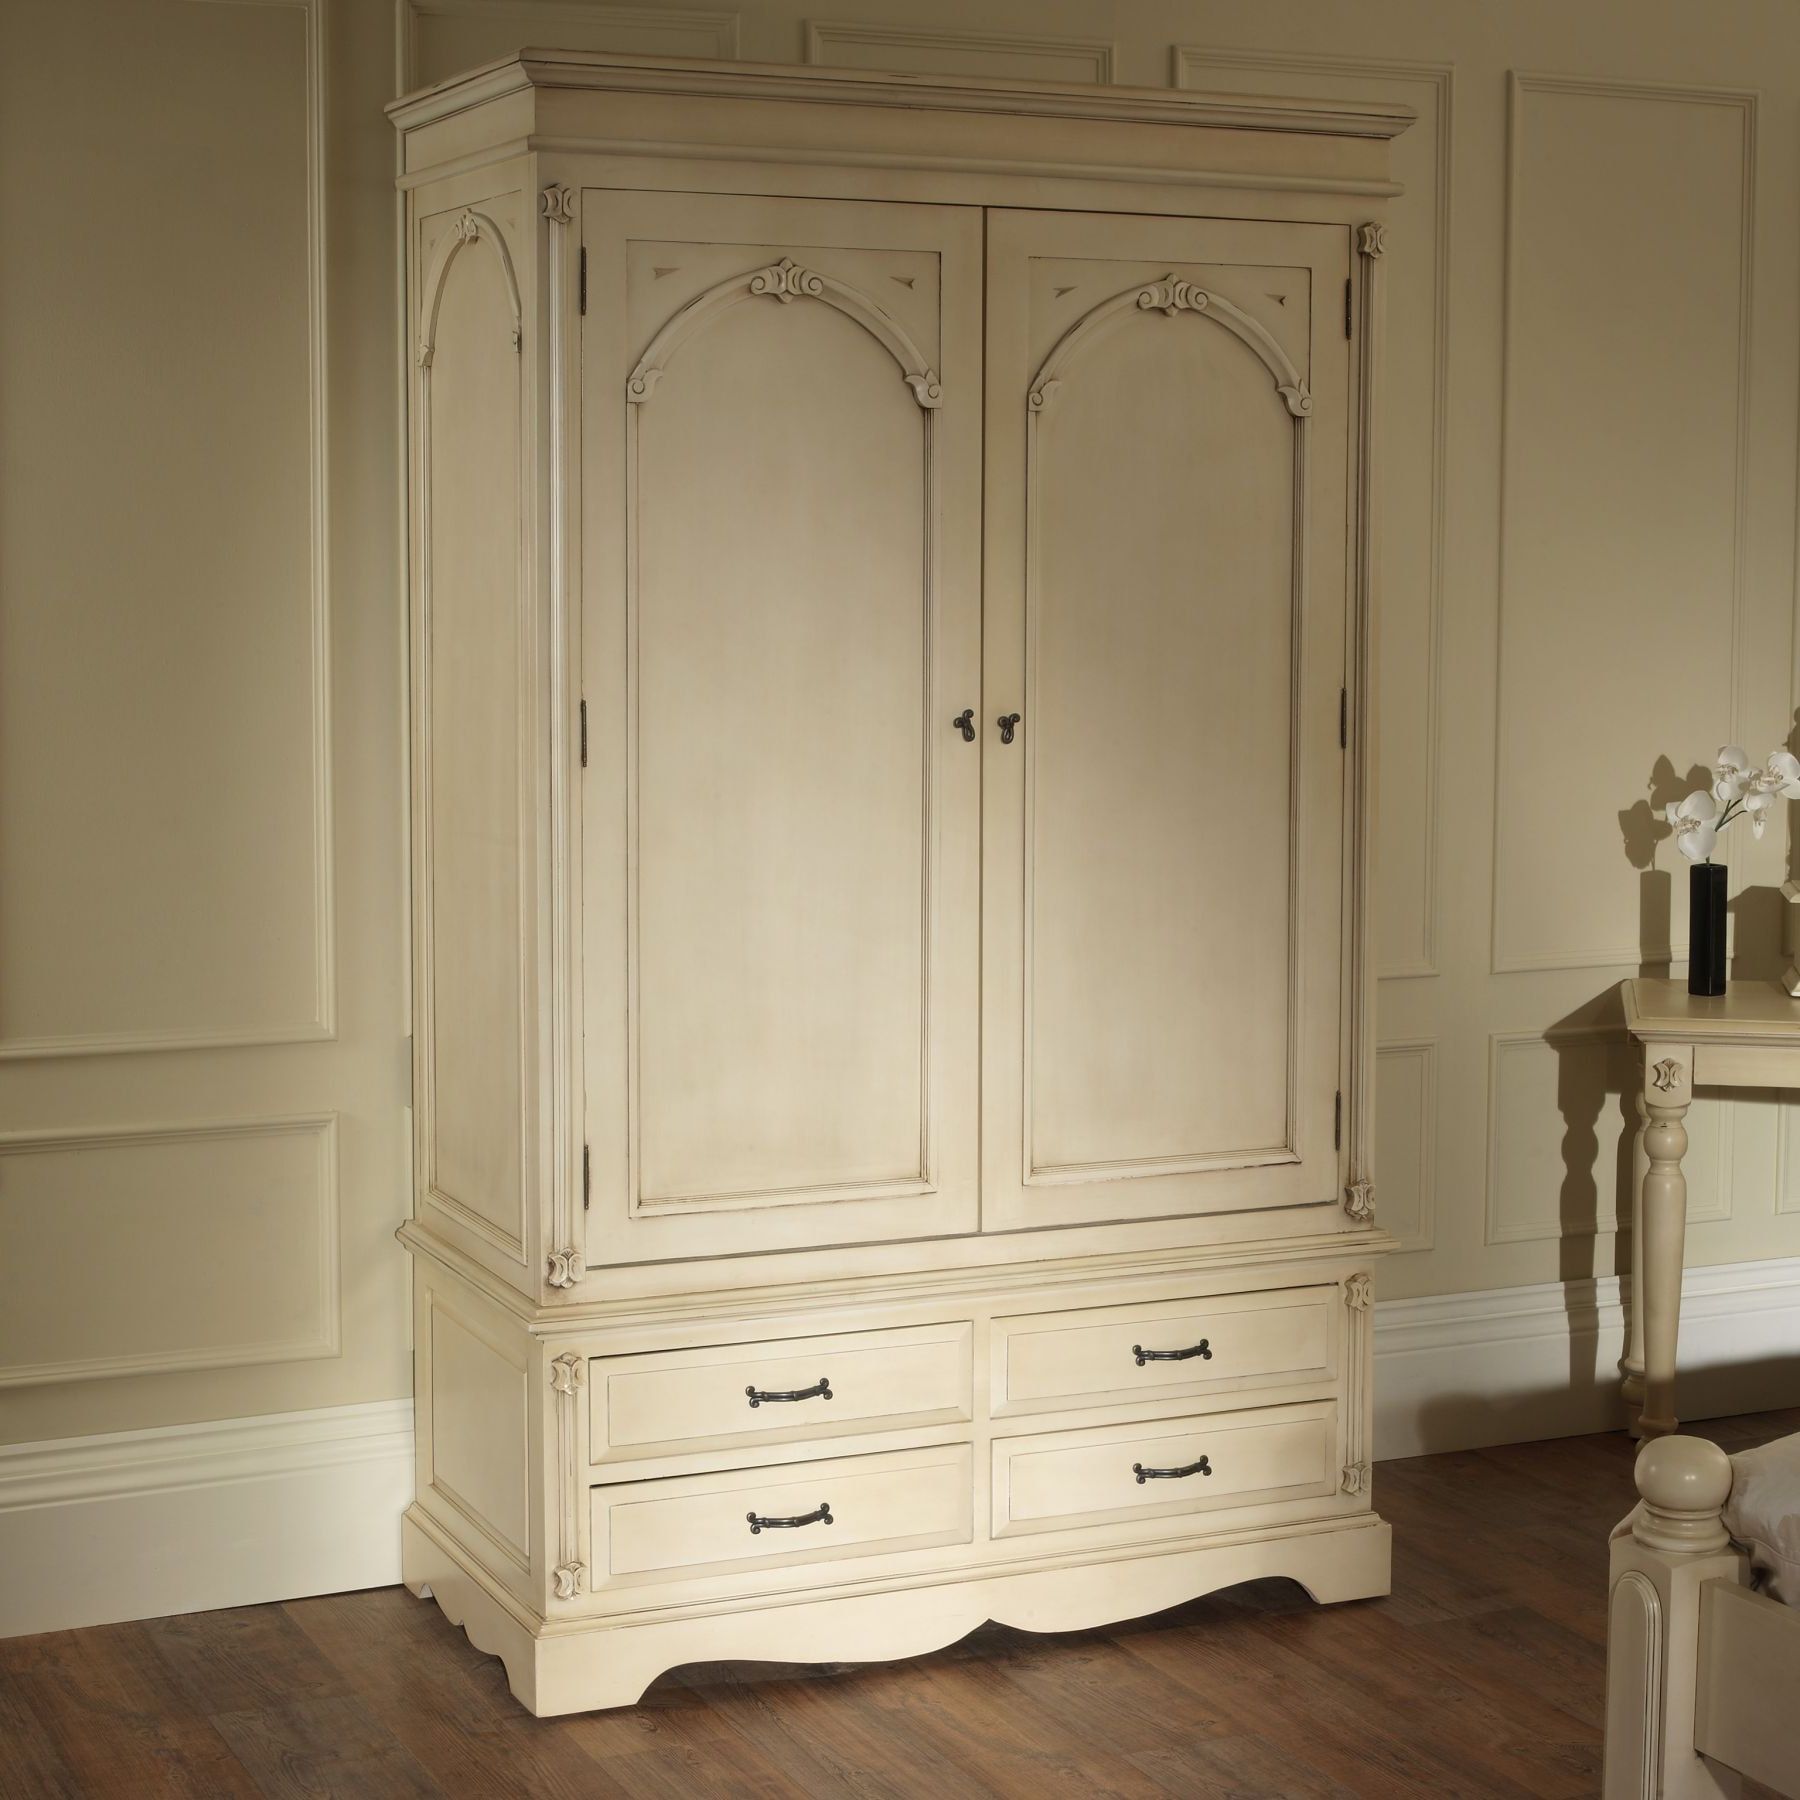 Victorian Antique French Wardrobe Works Well Alongside Our Shabby Chic  Furniture Intended For Victorian Style Wardrobes (View 3 of 20)